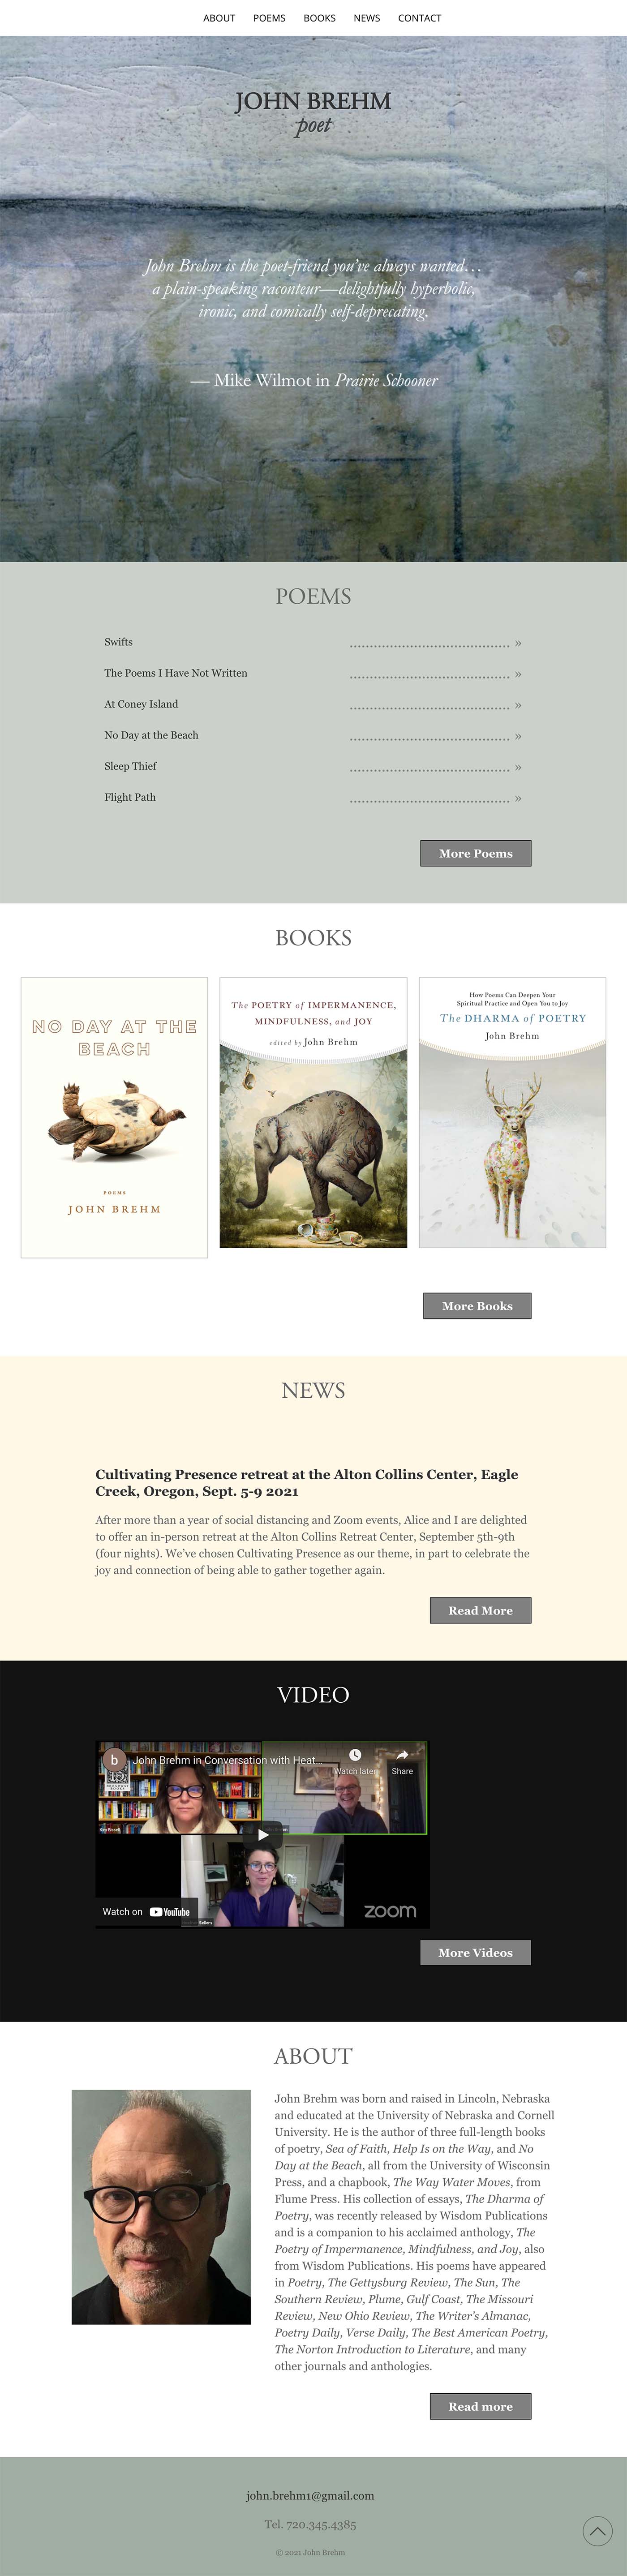 website design for authors - Website design for a poet, author and editor—this website displays books the author has written and edited as well as some poems.																																												 - long-scrolling page with rich visual sections making the website delightful to use.